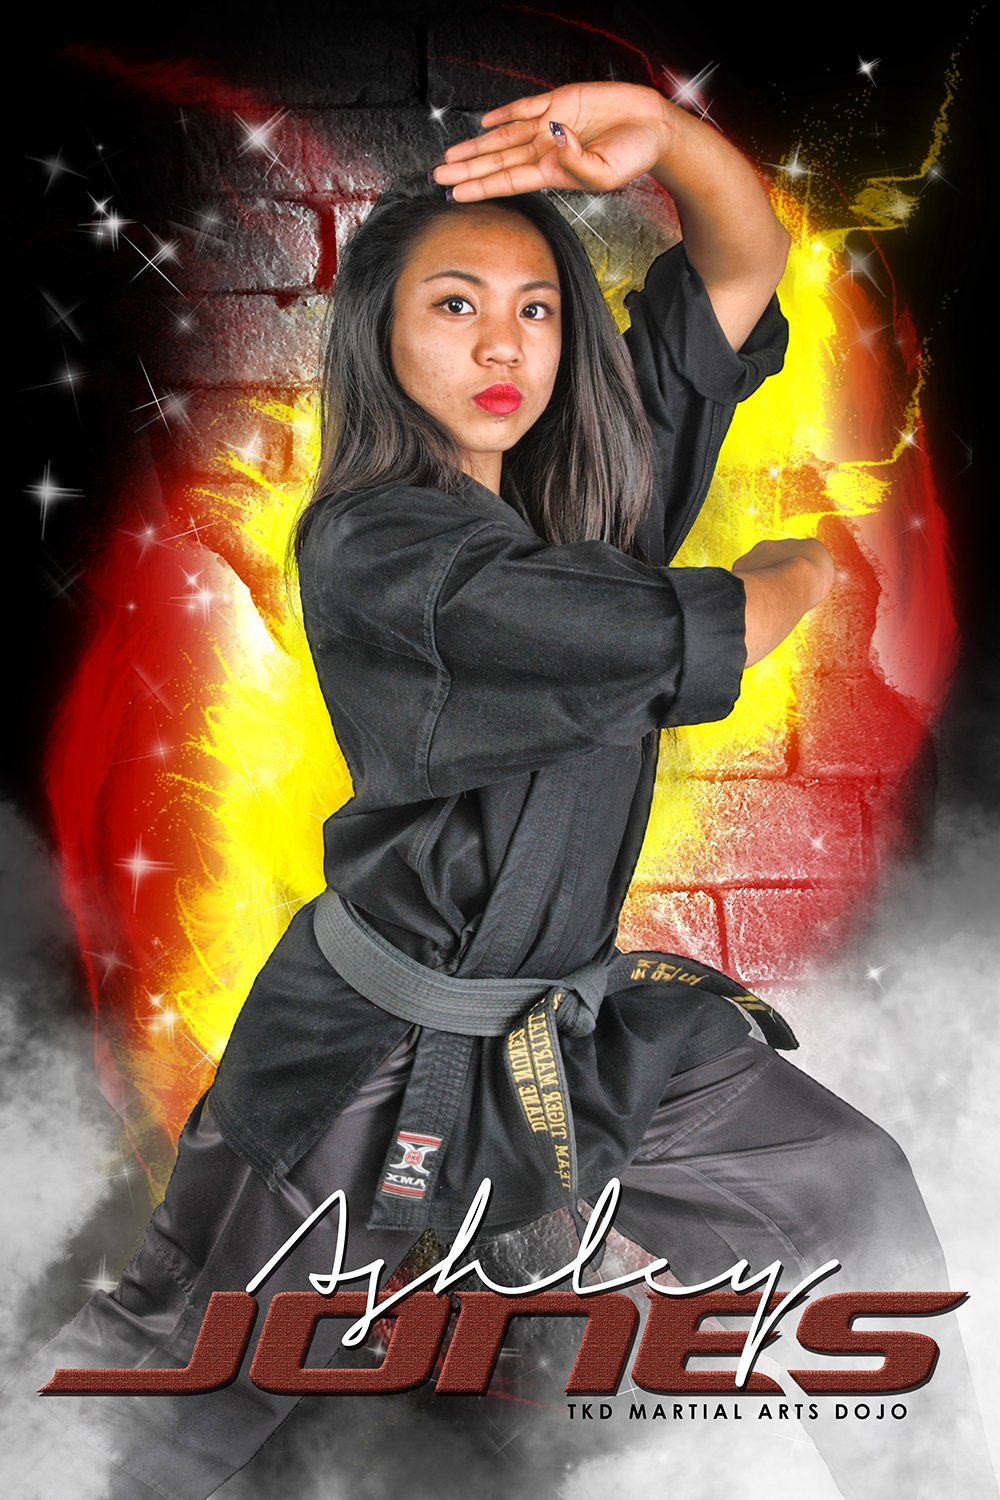 Brick Fire - Martial Arts Series - Poster/Banner V-Photoshop Template - Photo Solutions